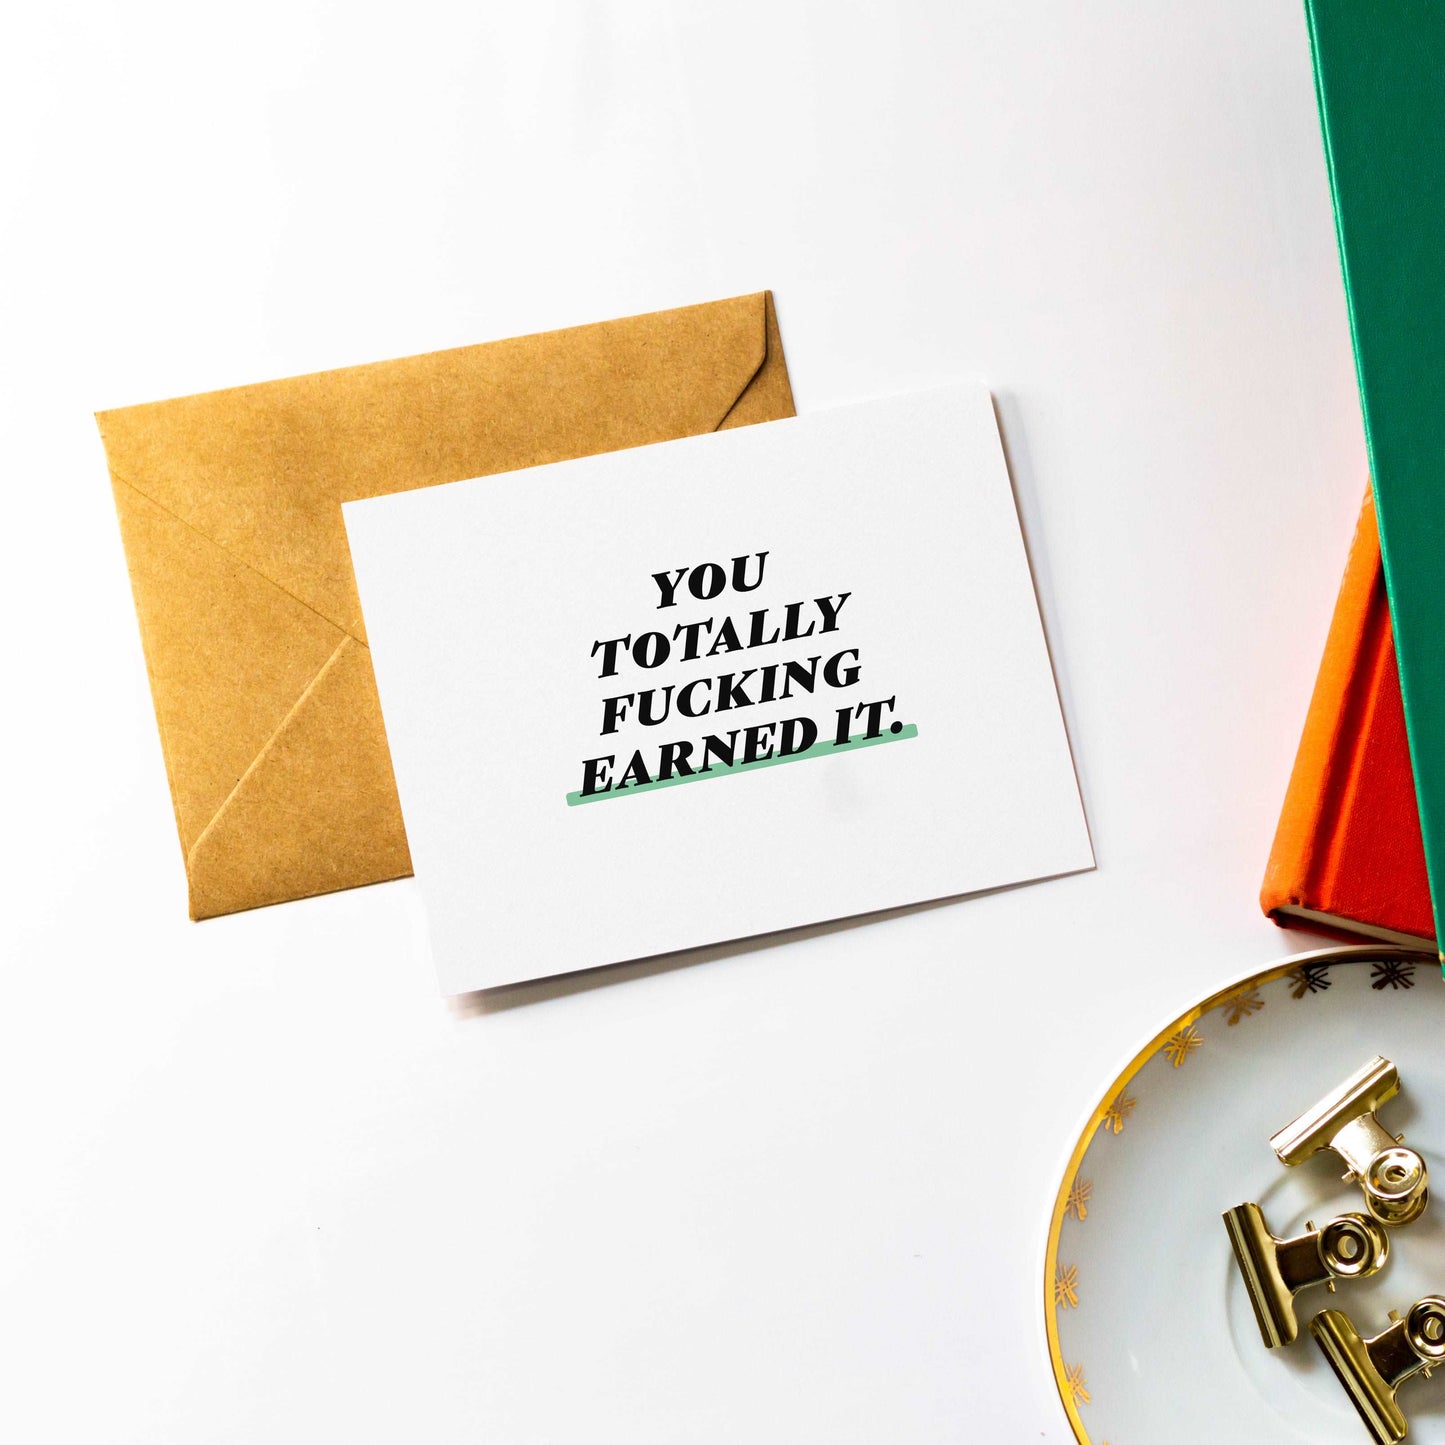 You Totally Fucking Earned It - Proud of You Greeting Card